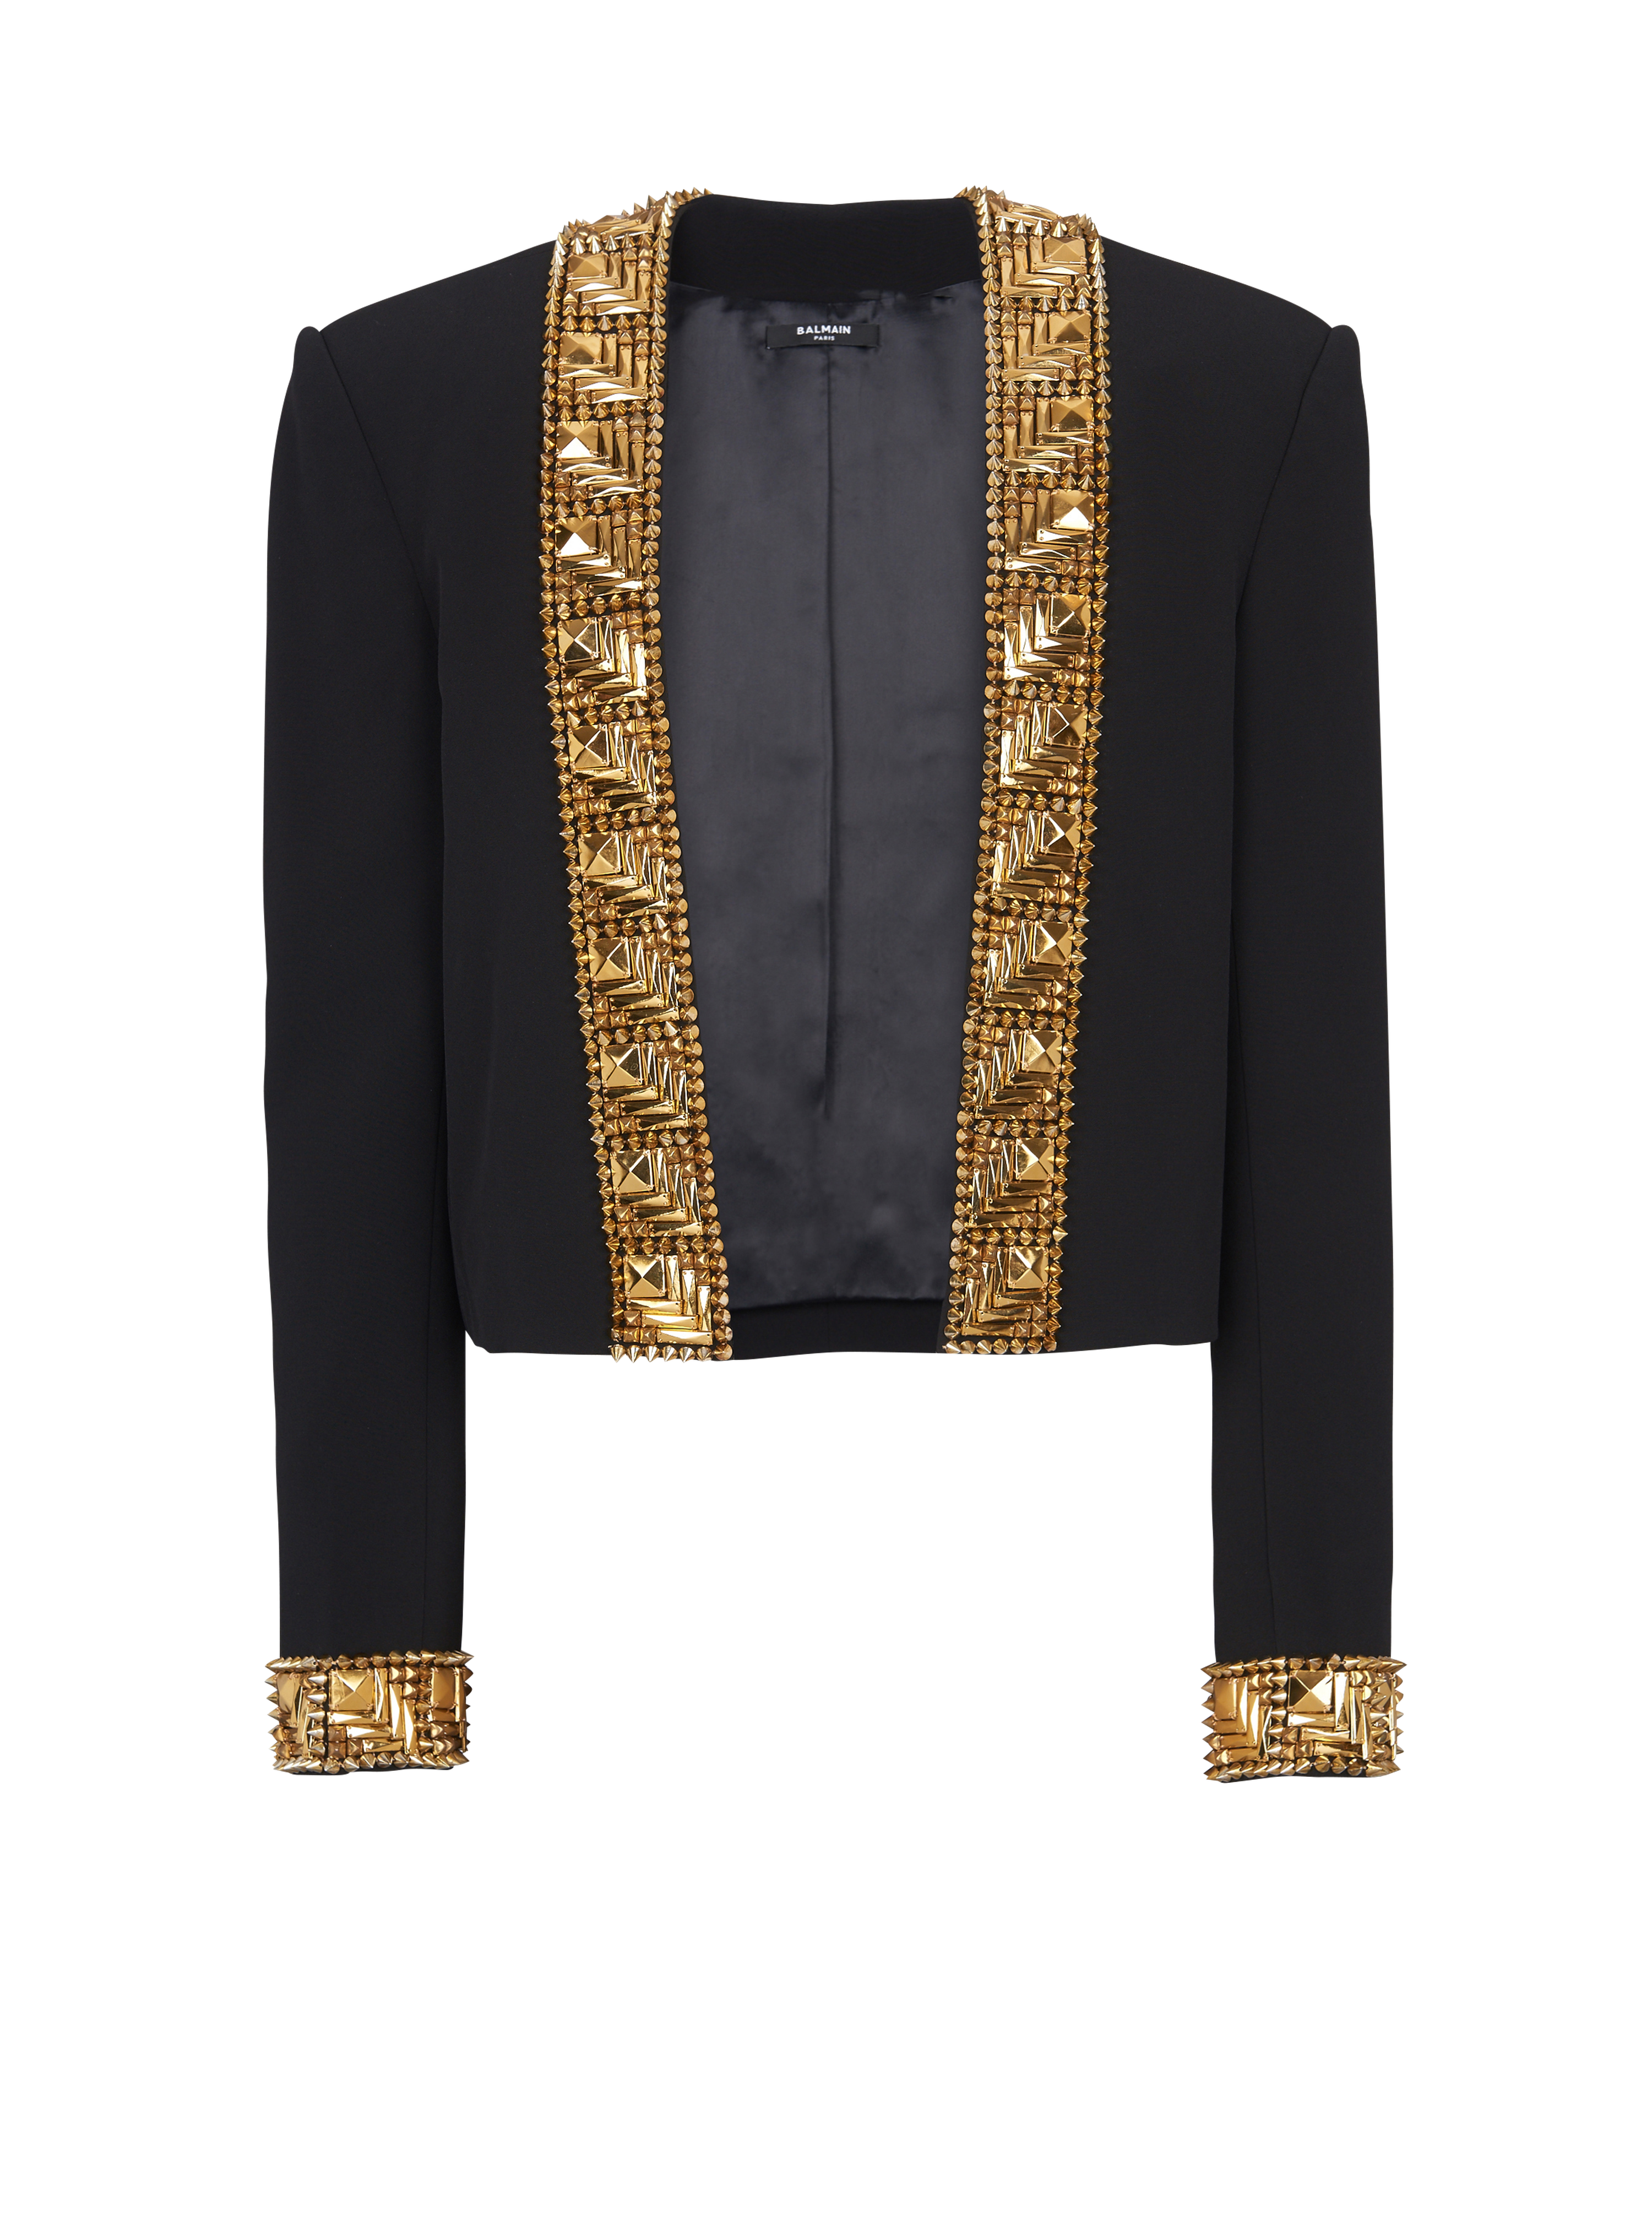 Blazer embroidered with pyramid studs, black